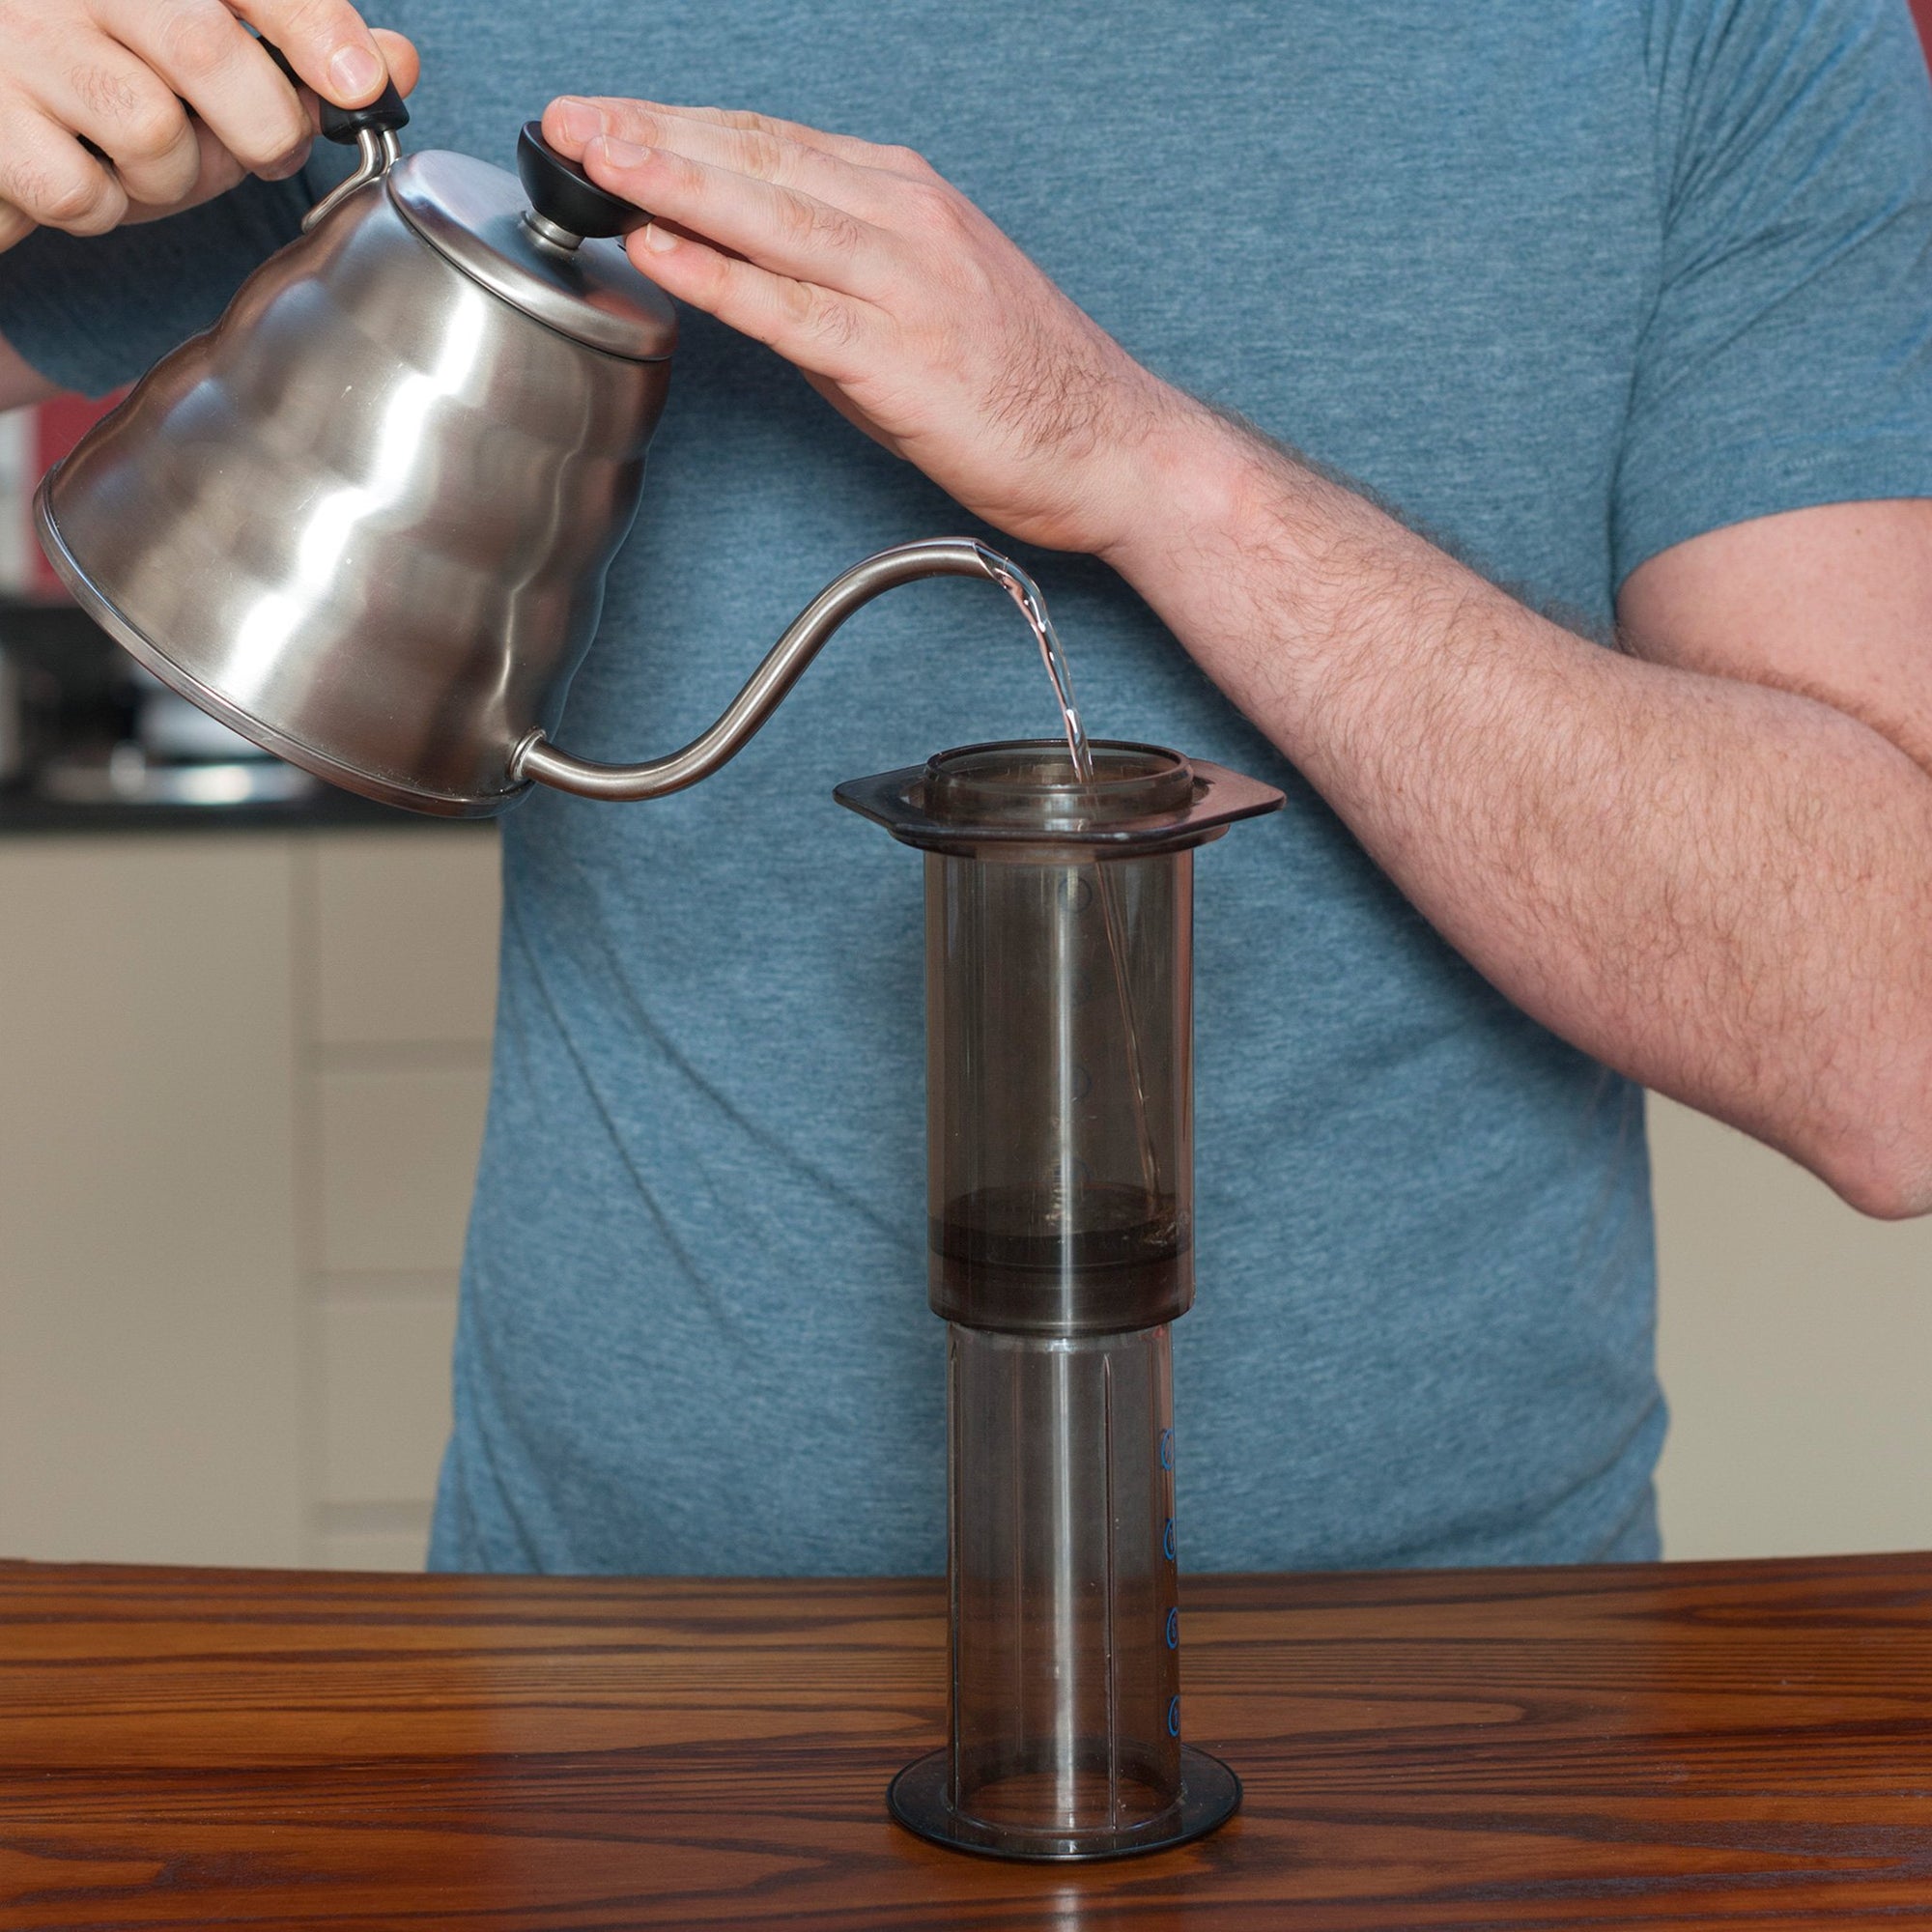 How to brew red espresso® Rooibos on your AeroPress